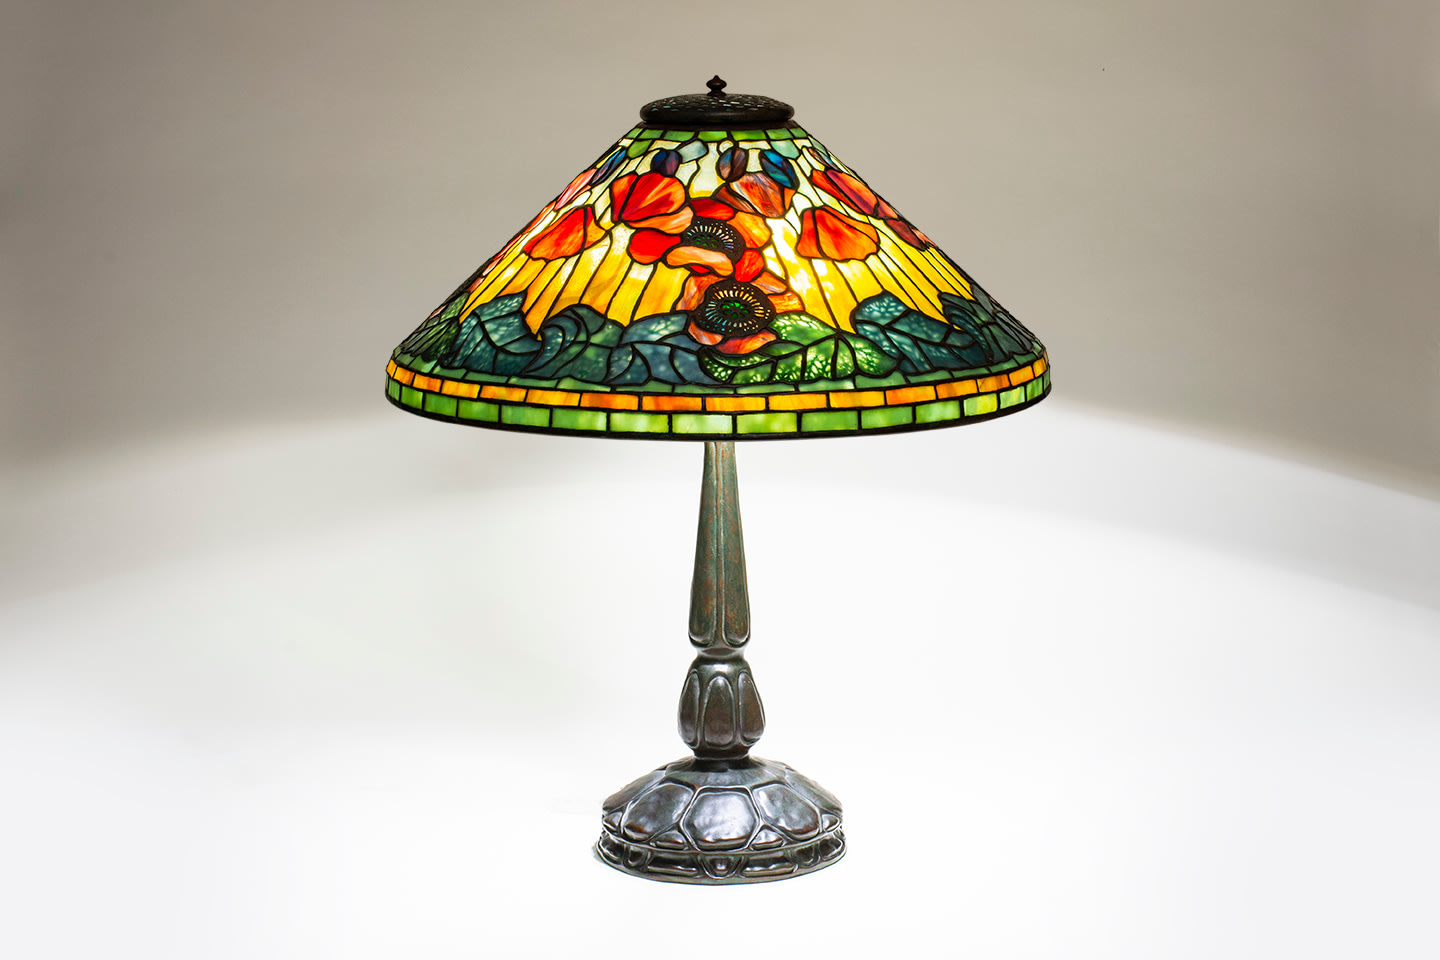 a leaded glass Tiffany Lamp depicting red poppies with pierced metal filigree mounted on top of the glass representing the centers of the flowers, against a background of variegated yellow glass, with poppy buds in blue-red glass near the top of the shade, the lower edge of the shade with green leaves, the vines formed by pierced metalwork mounted to the interior of the shade.